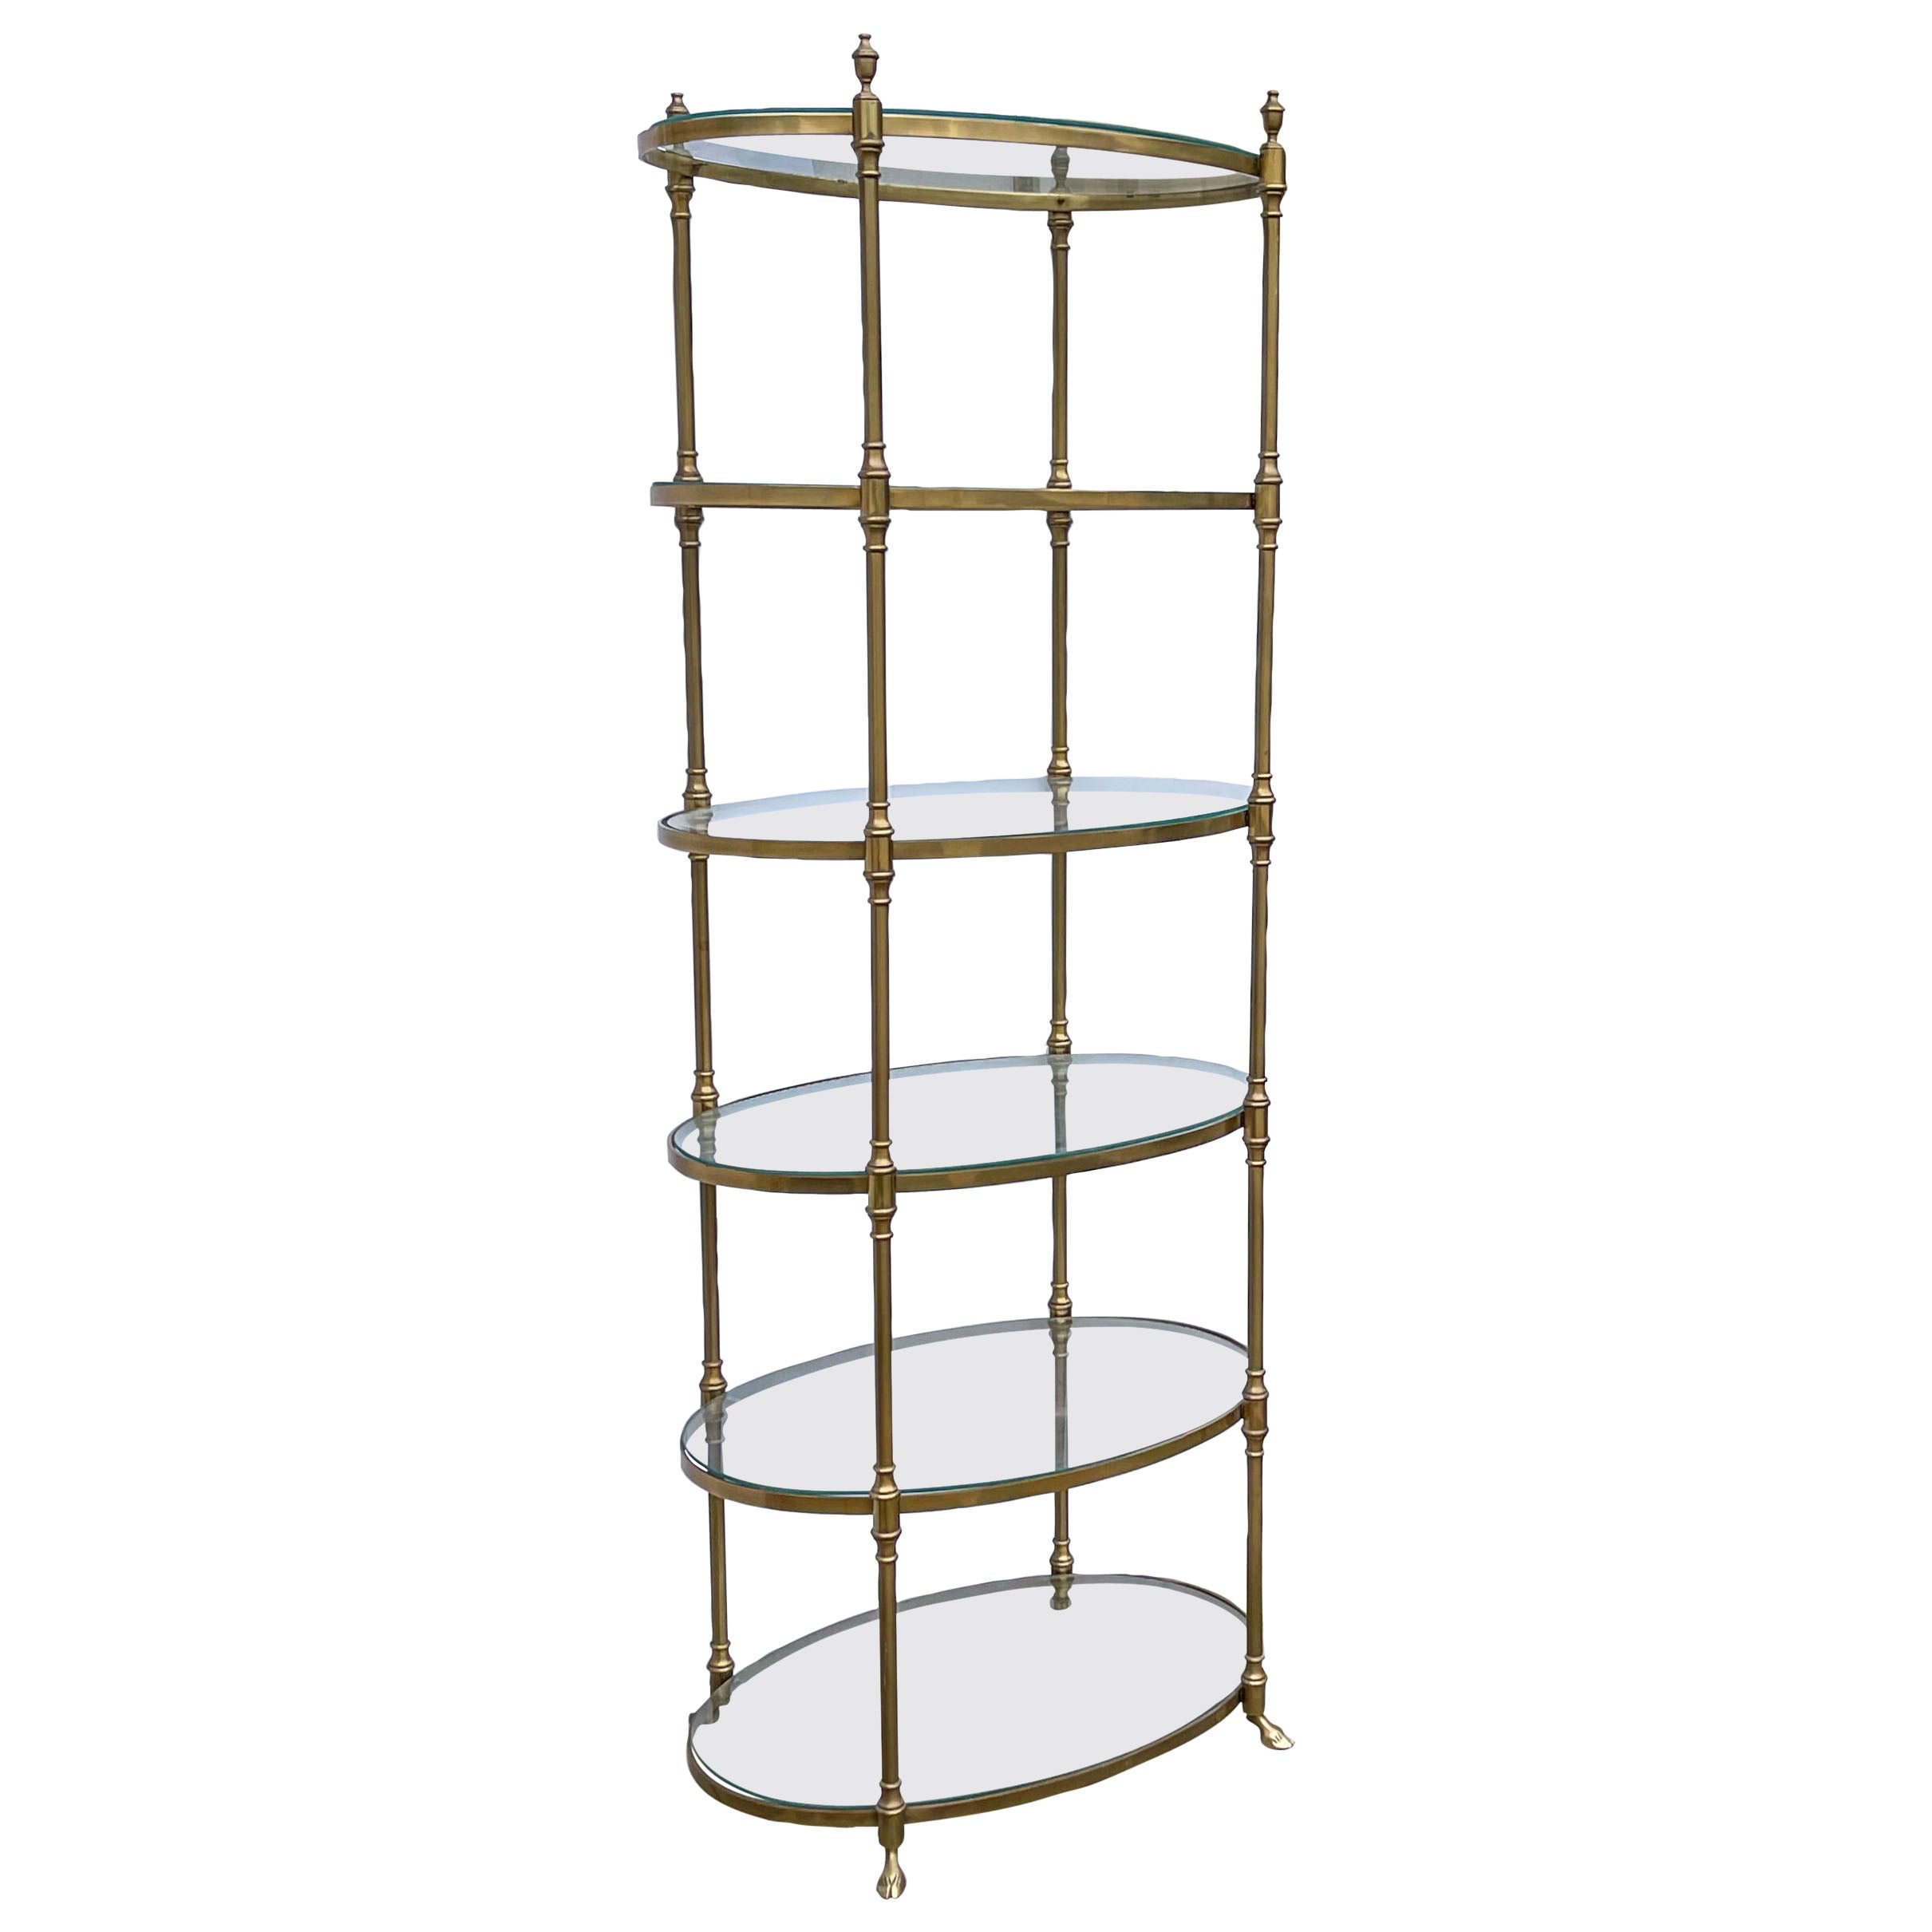 1970s Tall Neo-Classical Maison Jensen Style Brass and Glass Etagere / Shelf